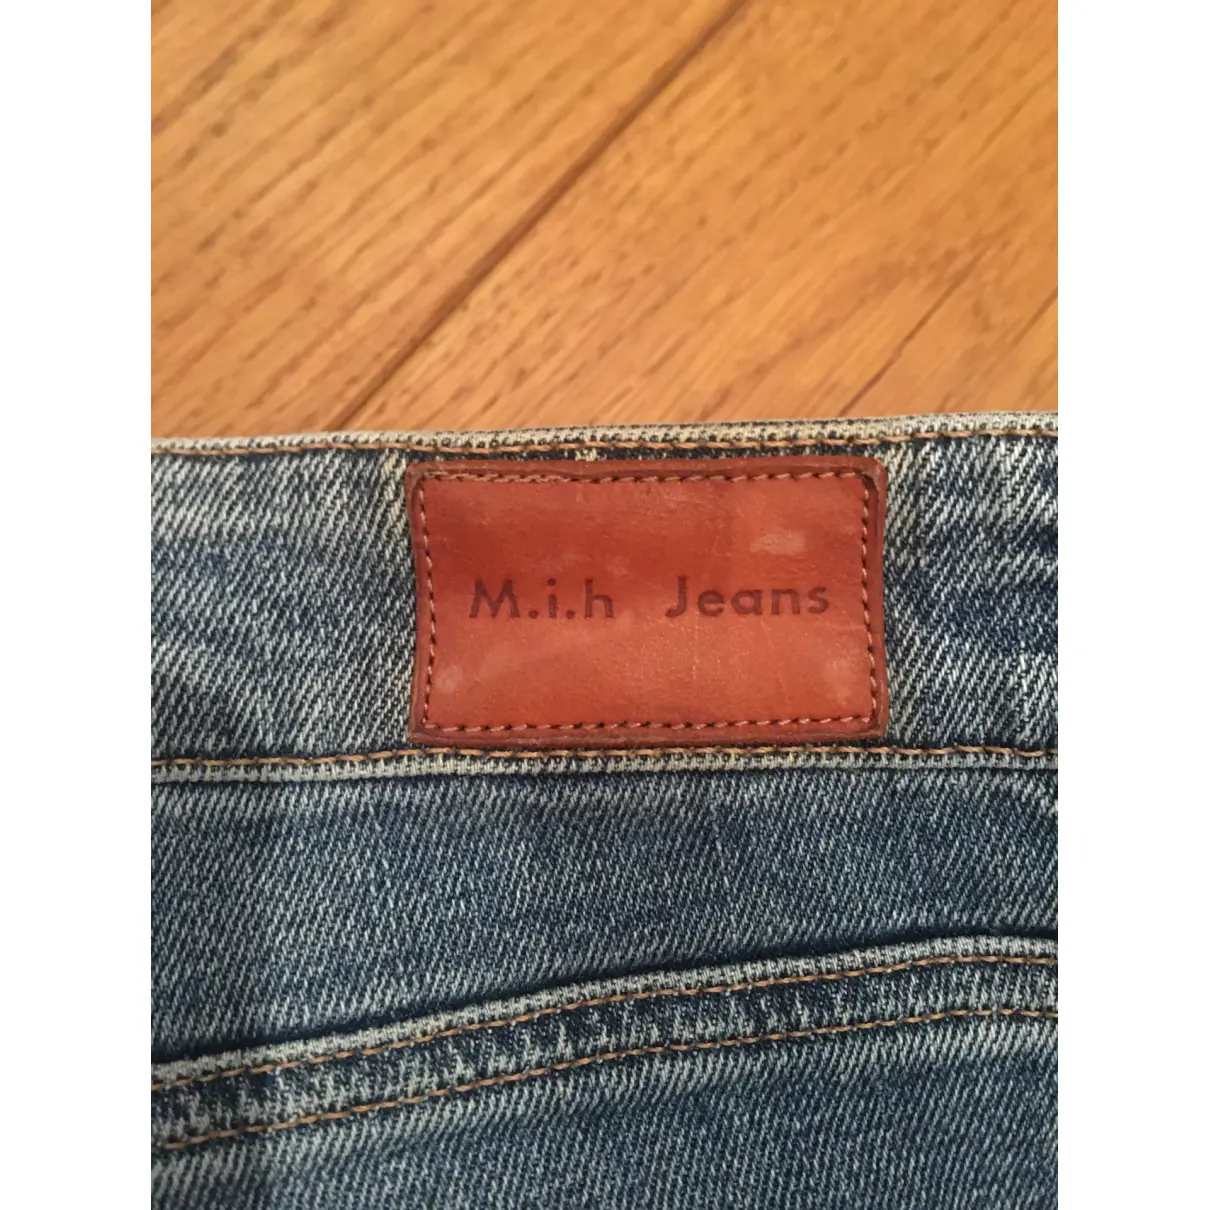 Jeans Mih Jeans